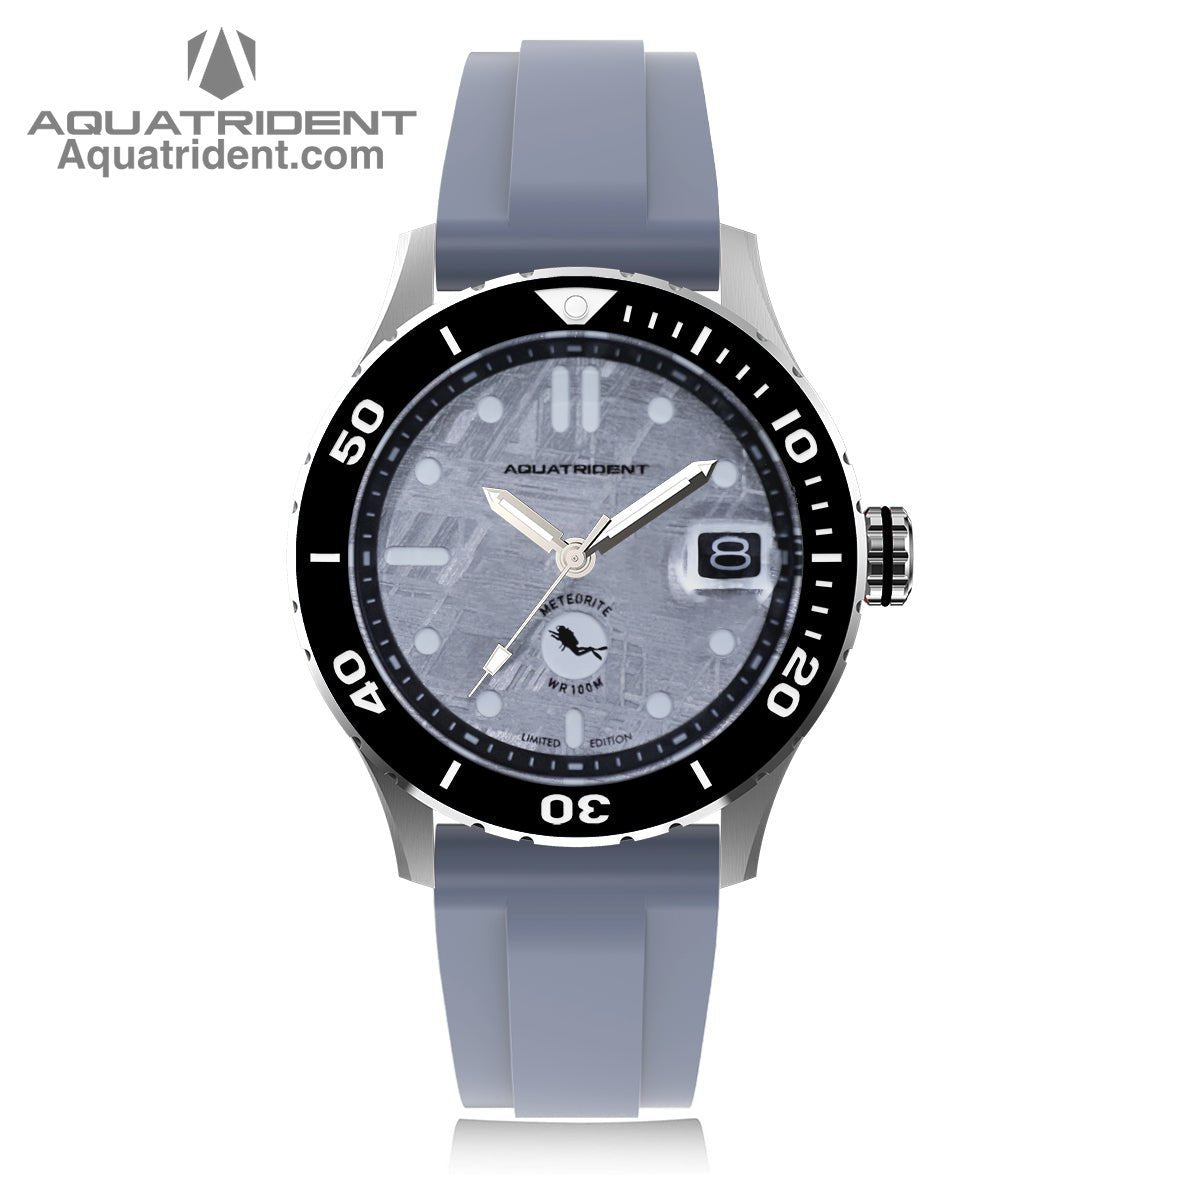 Aquatrident's Ocean Automatic Watch with Ceramic，Rotating Bezel and grey Meteorite Dial front view